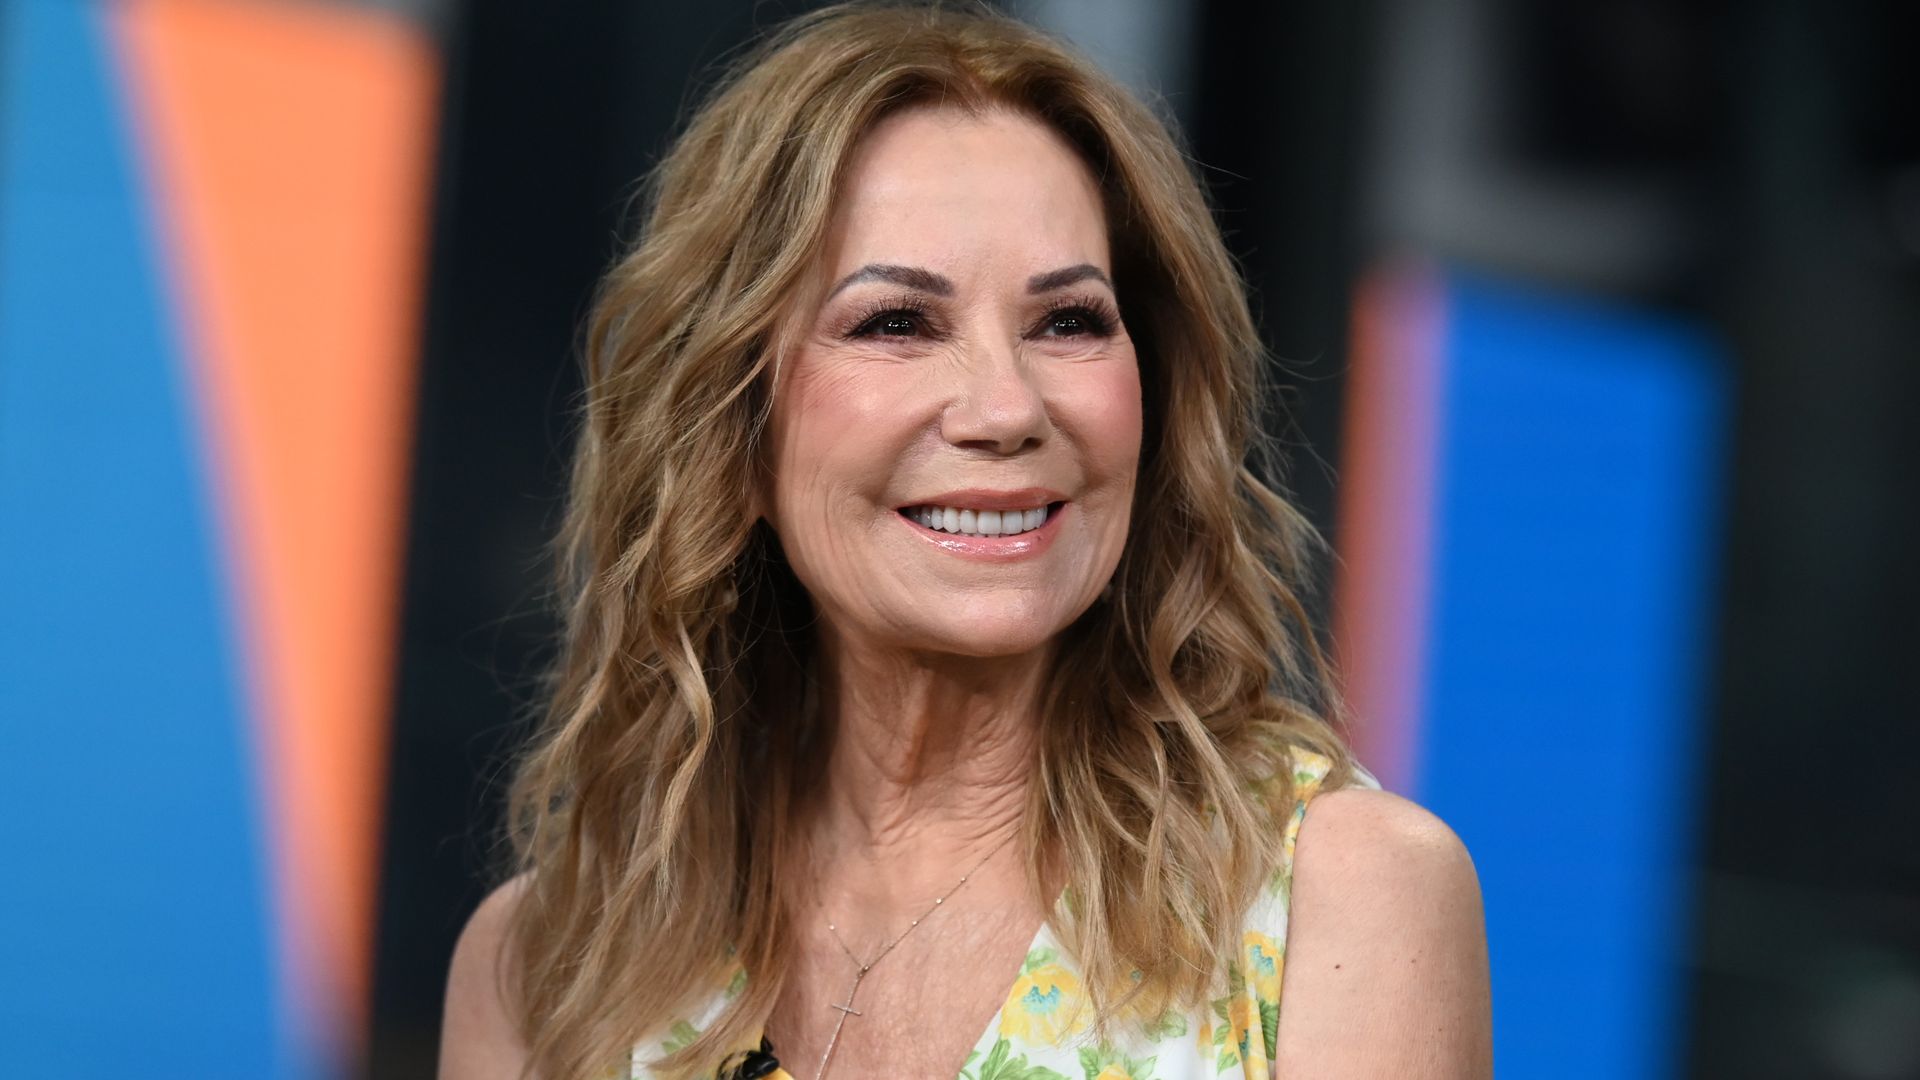 Kathie Lee Gifford visits "FOX & Friends" at Fox News Channel Studios on August 30, 2022 in New York City